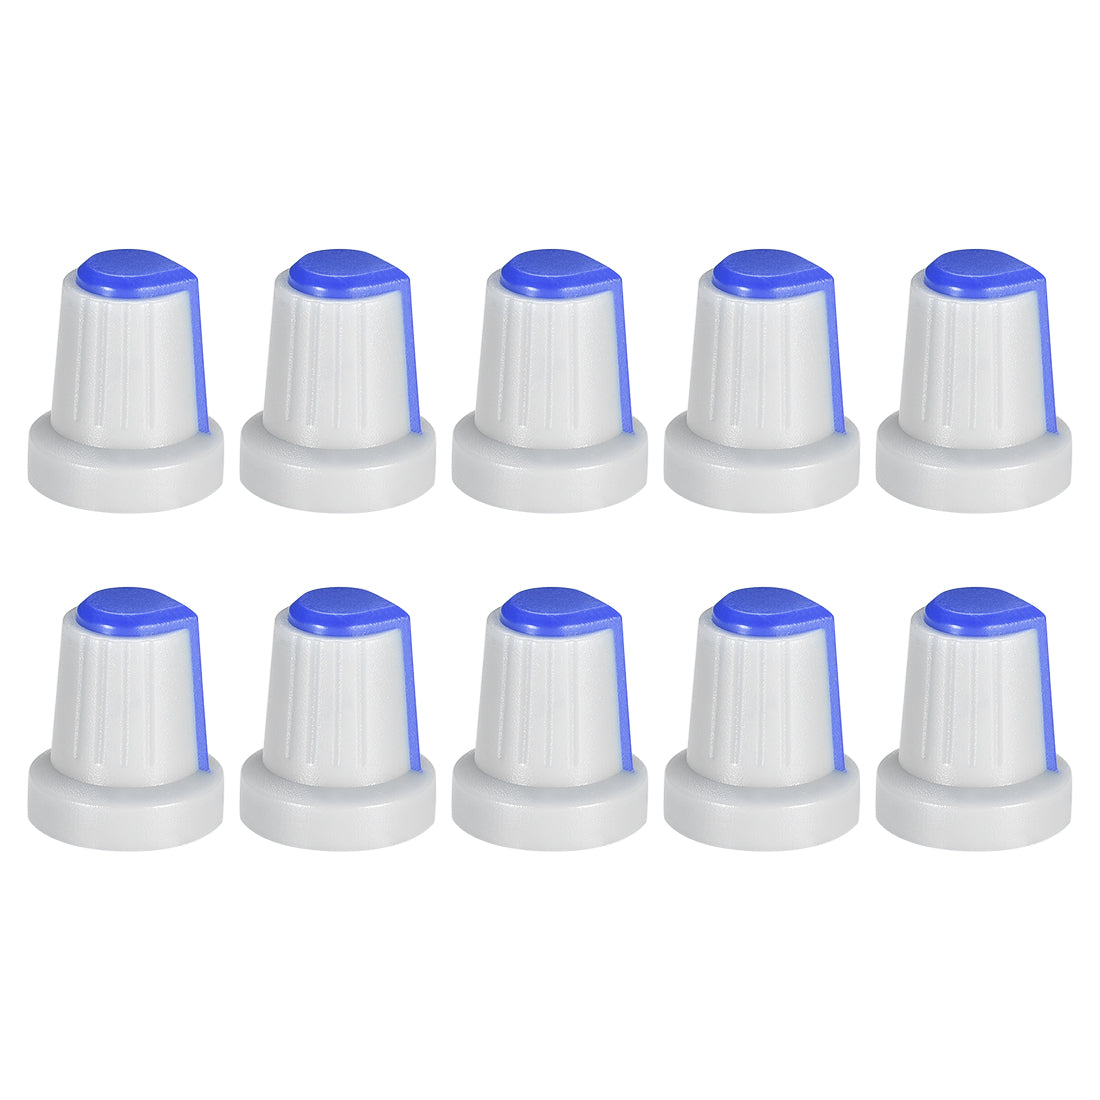 Uxcell Uxcell 10Pcs 6mm Shaft Hole Knob for Speaker Effect Pedal Amplifier Grey Potentiometer Knob Purple Mark